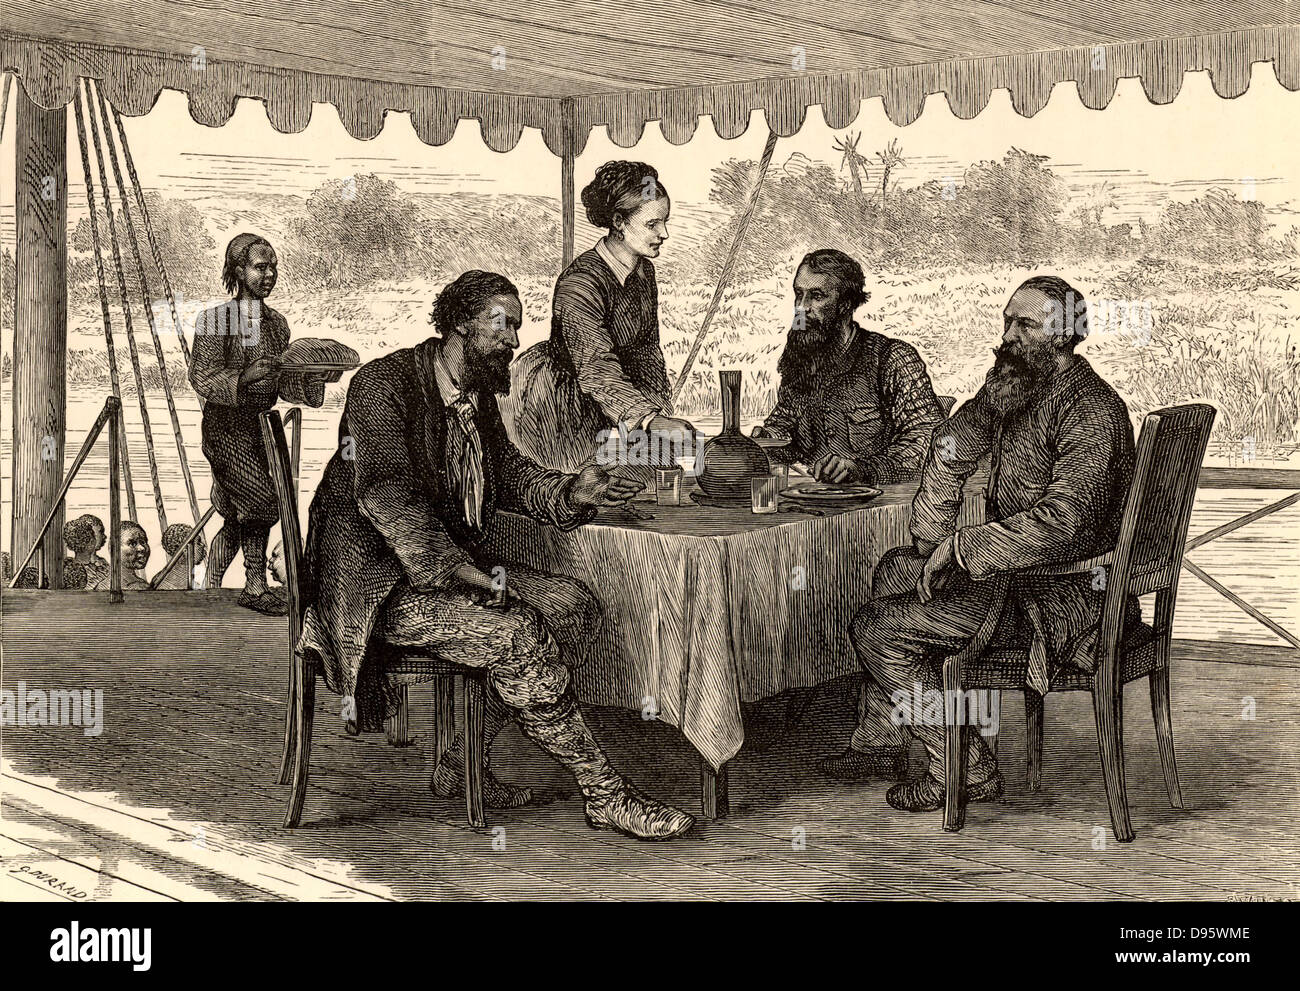 English explorers John Hanning Speke (1827-1864) and James Augustus Grant (1827-1892) at Gondokoro, south Sudan, at the end of their expedition, where they were met by Samuel (1821-1893) and Florence (1841-1916) Baker. On their 1860-1863 expedition Speke and Grant mapped parts of Lake Victoria Nyanza, Africa, and Speke found the outlet of the lake into the White Nile which he named Ripon Falls.  From 'Heroes of Britain in Peace and War' by Edwin Hodder (London, c1880), Stock Photo